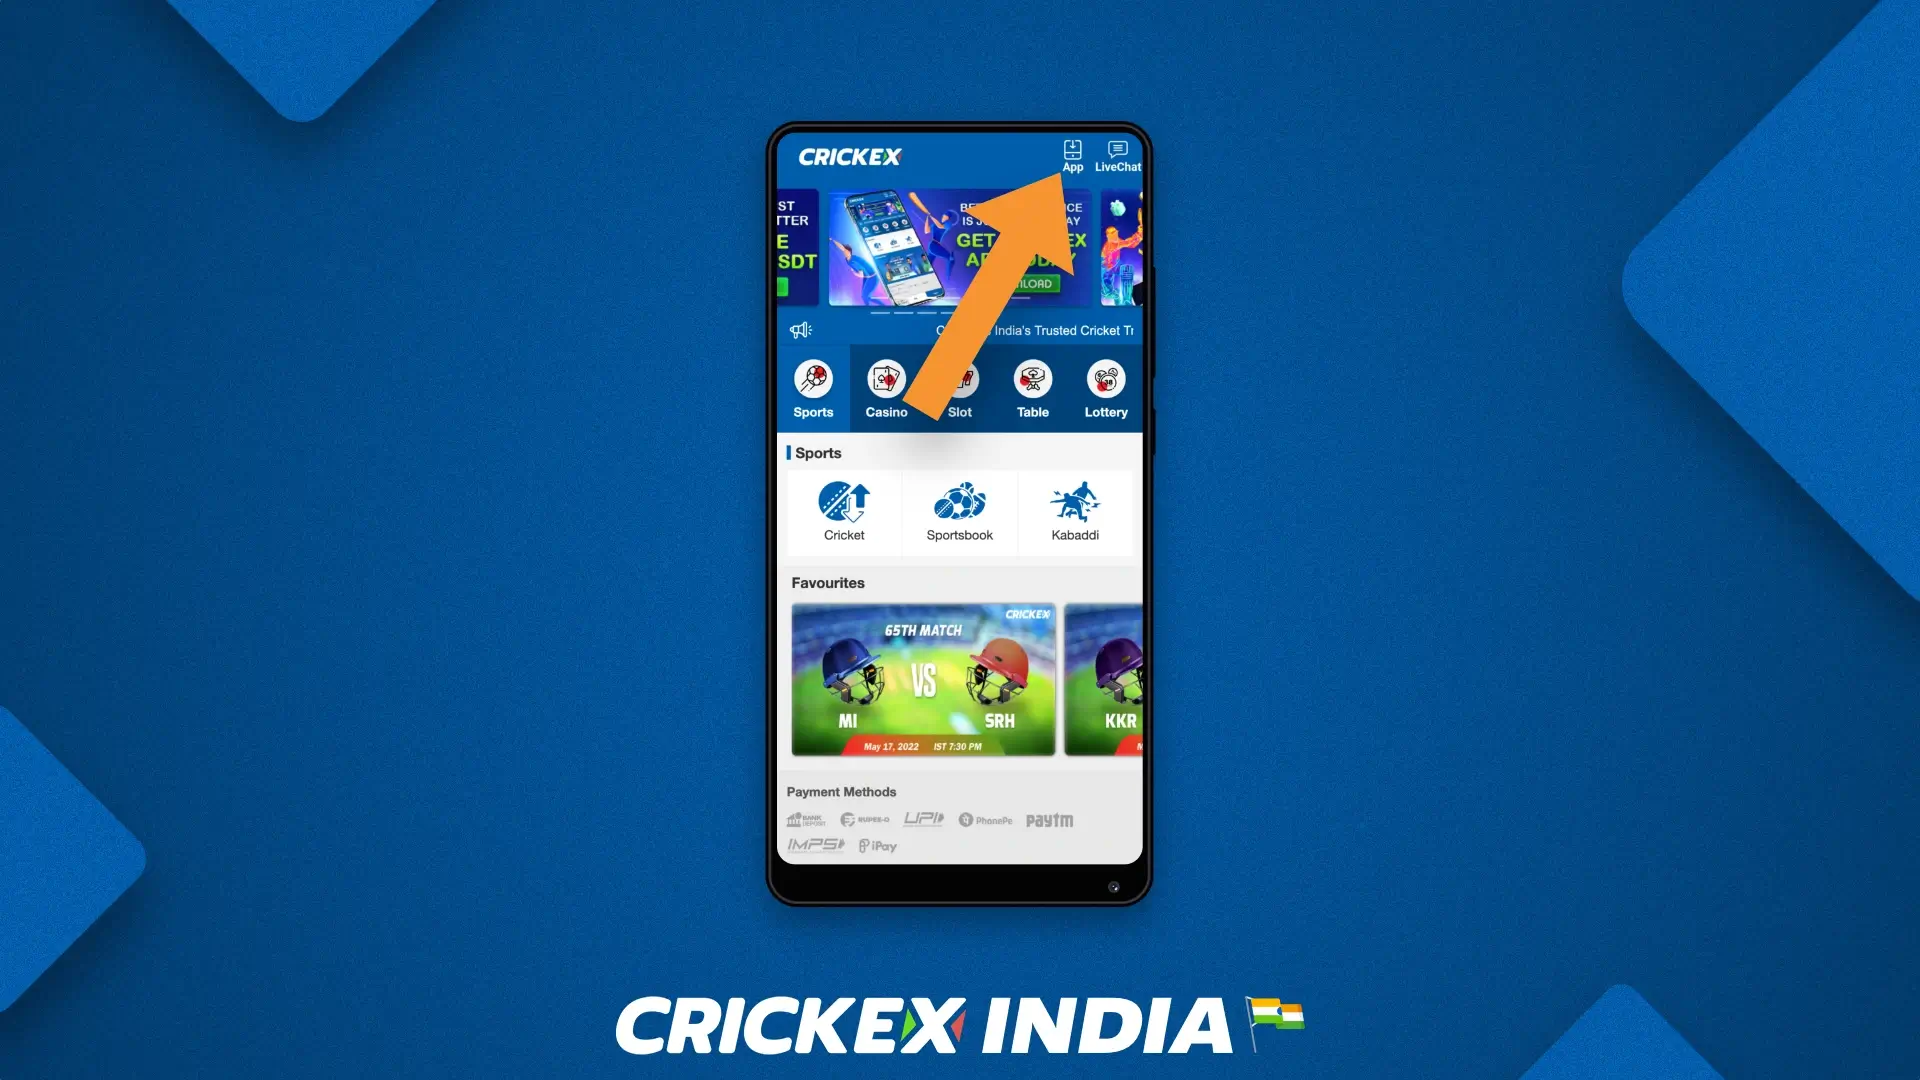 Download the Crickex app for Android devices